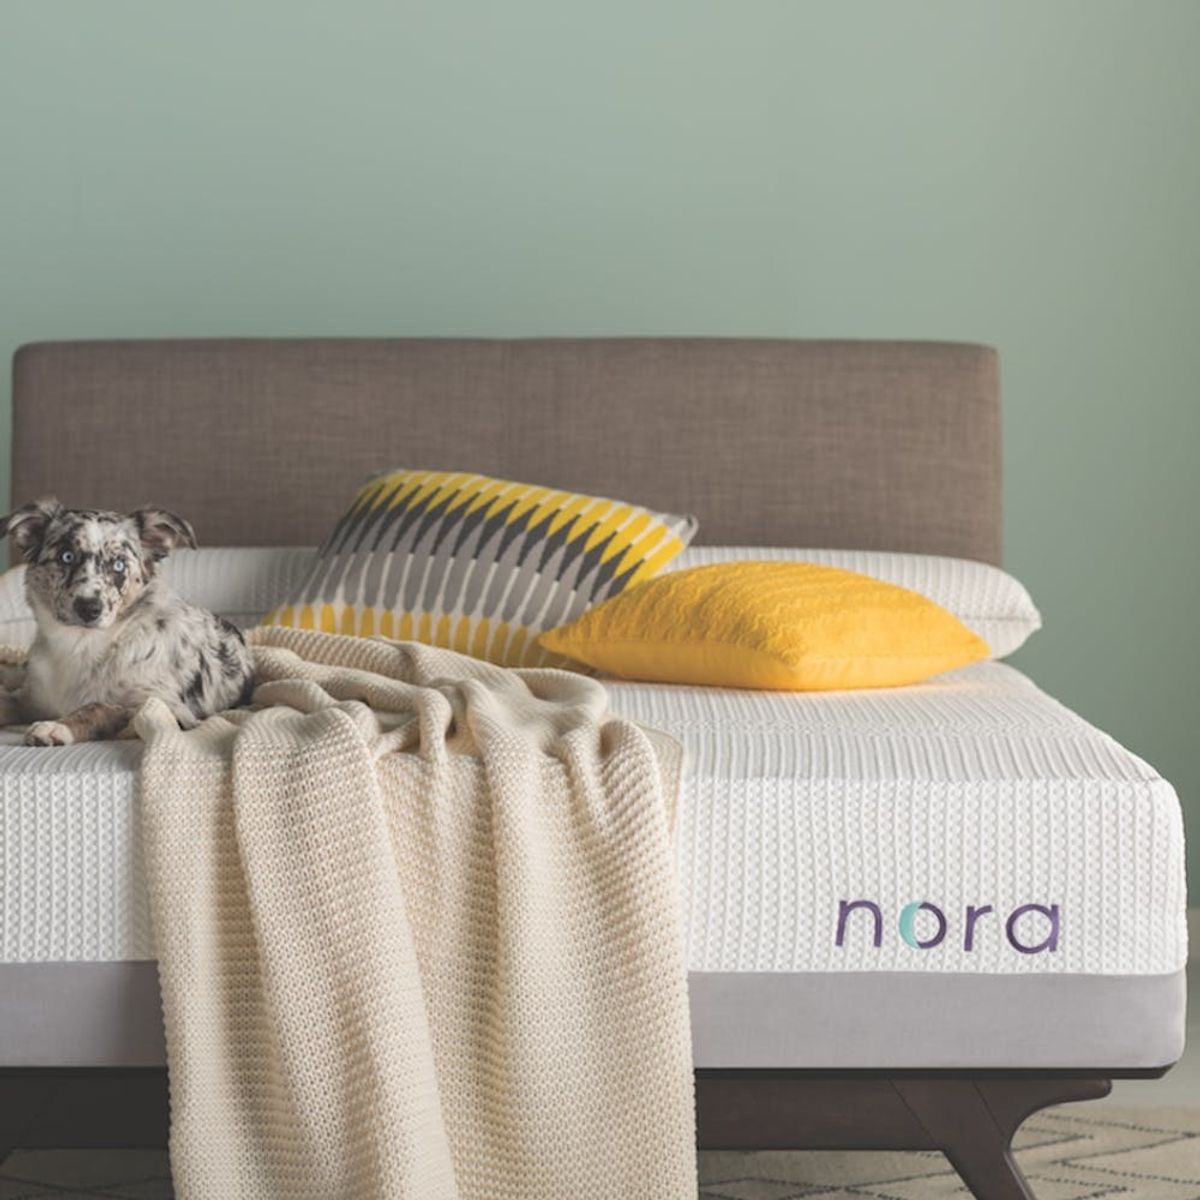 The New Mattress-in-a-Box That You Can *Actually* Afford